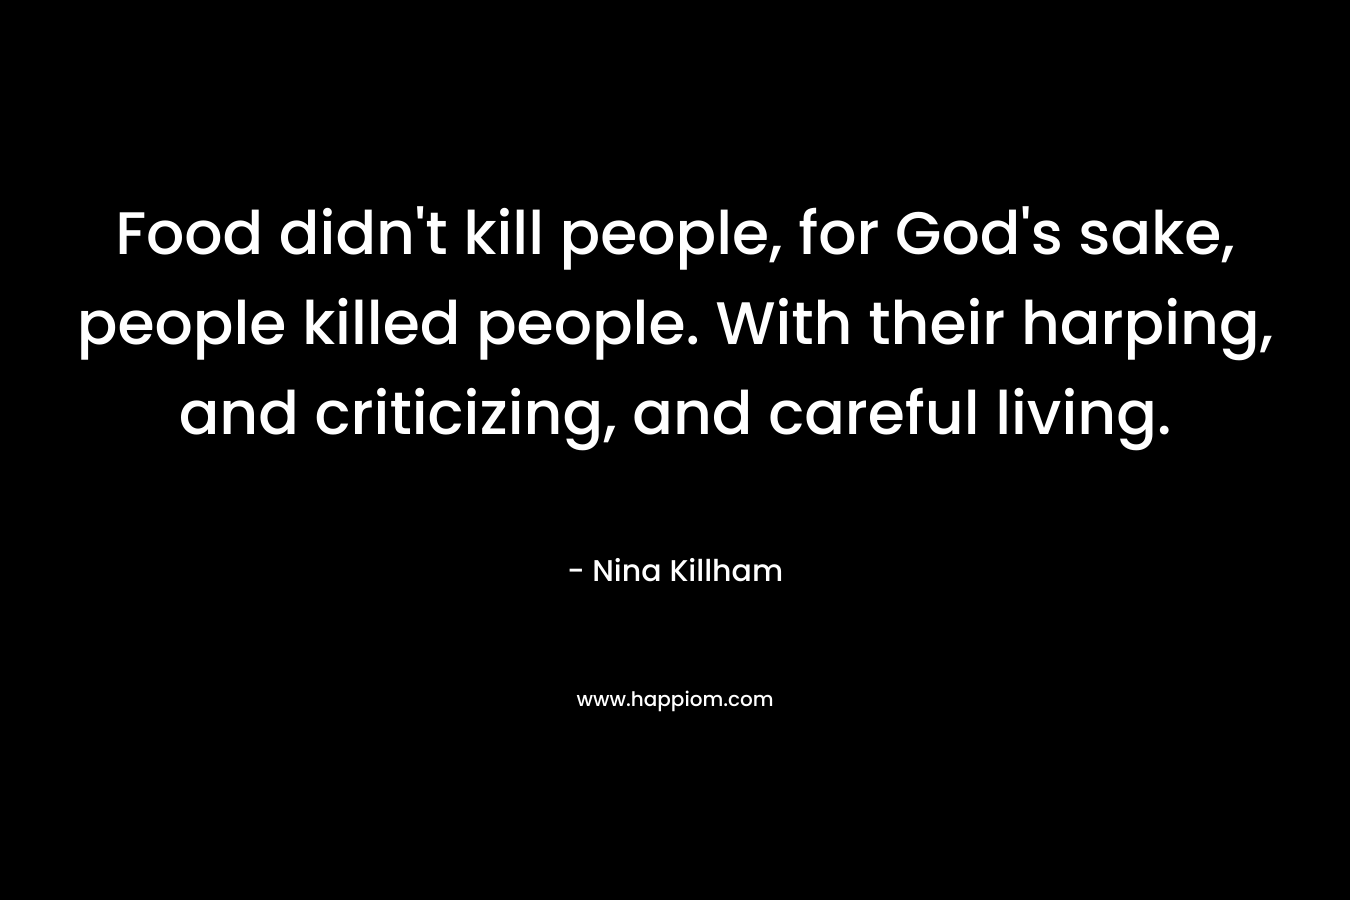 Food didn’t kill people, for God’s sake, people killed people. With their harping, and criticizing, and careful living. – Nina Killham